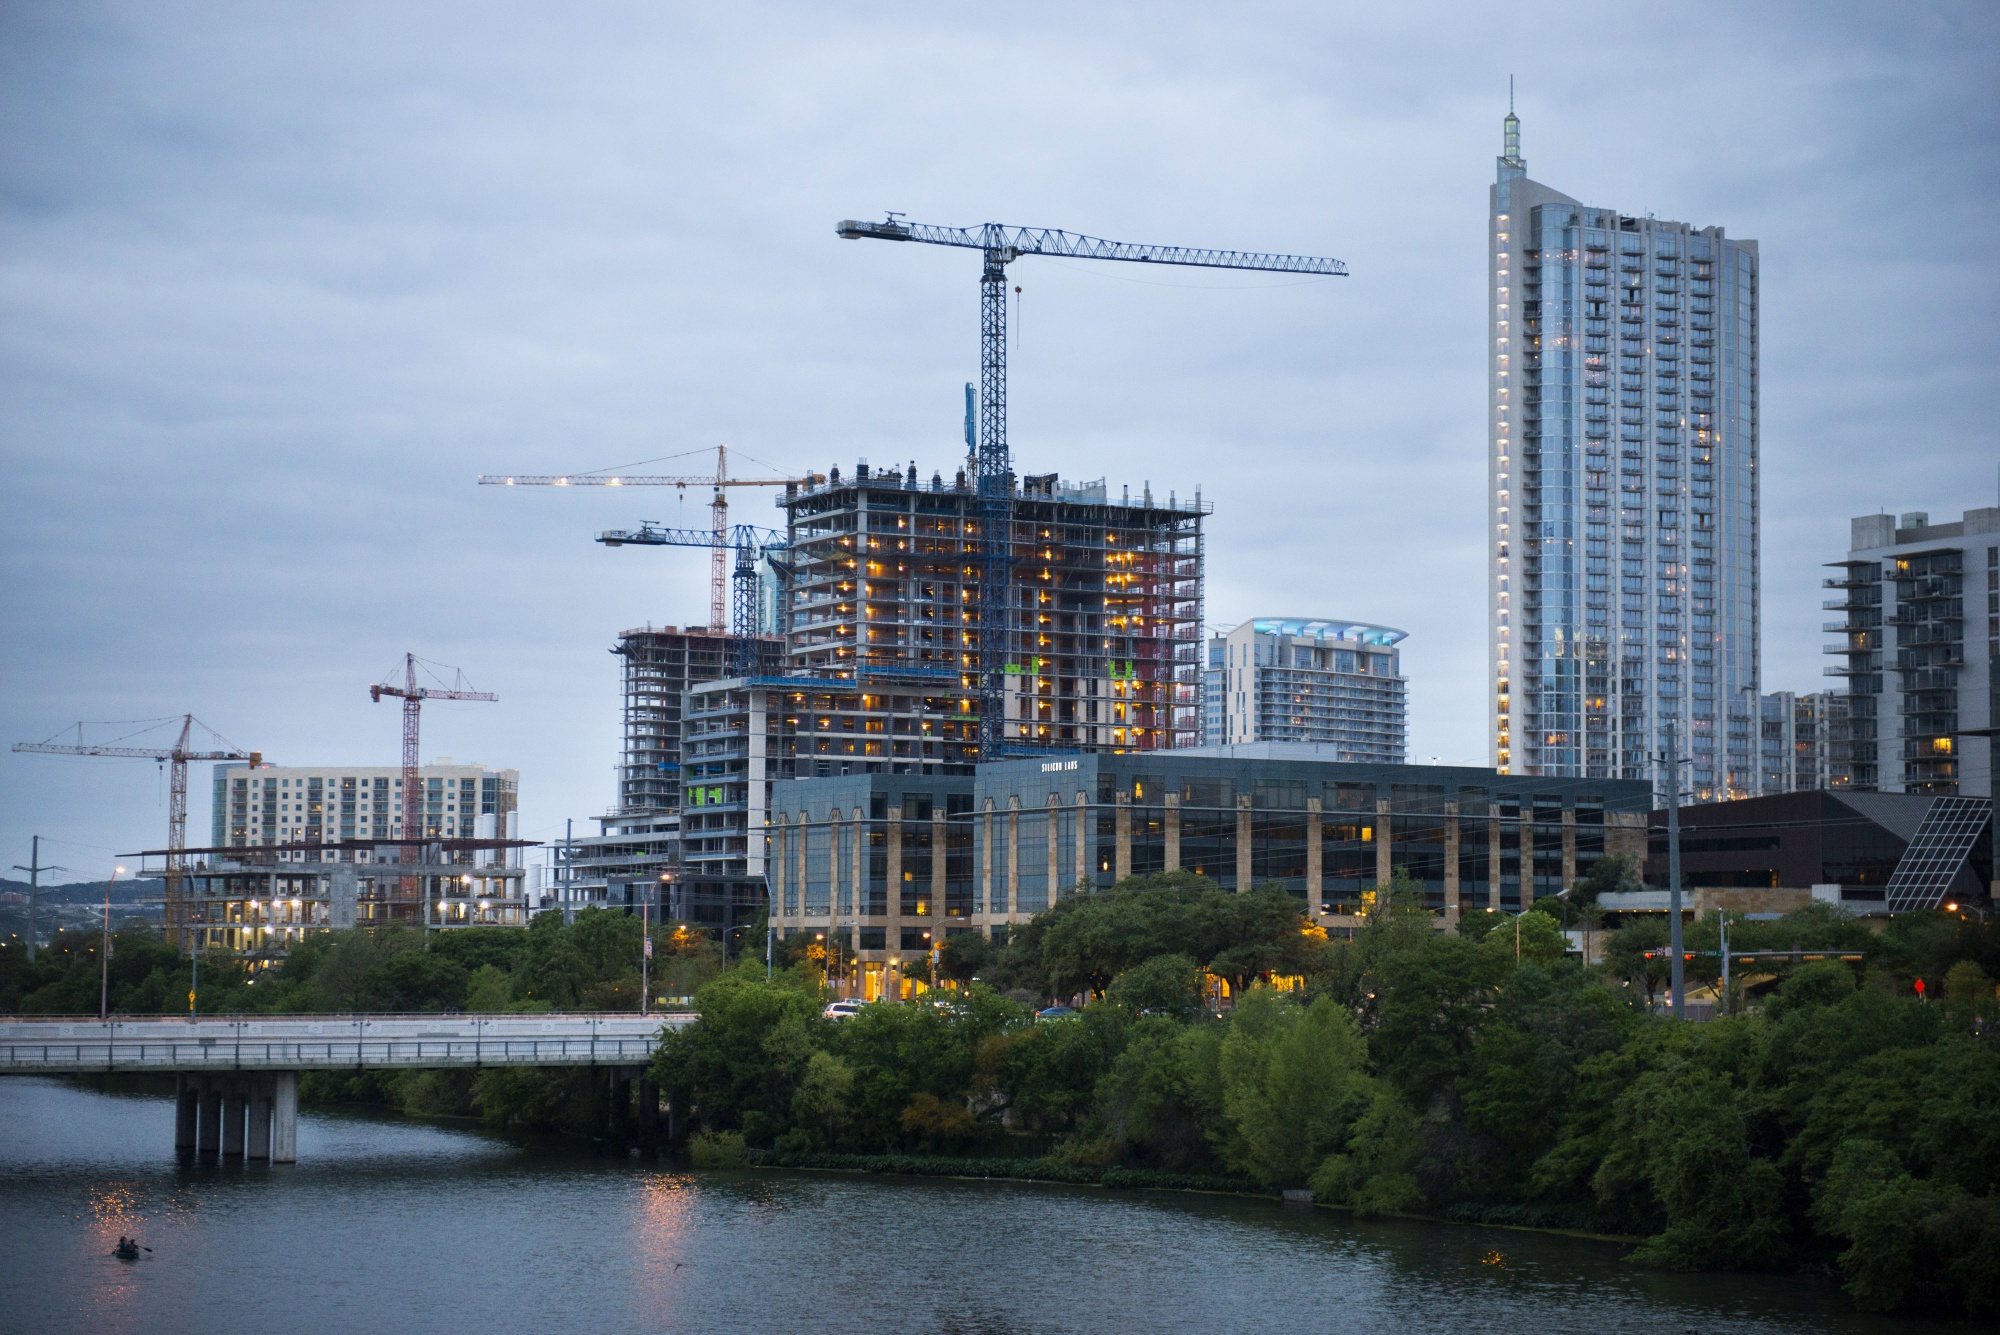 Construction cranes stand in the skyline of Austin, Texas.